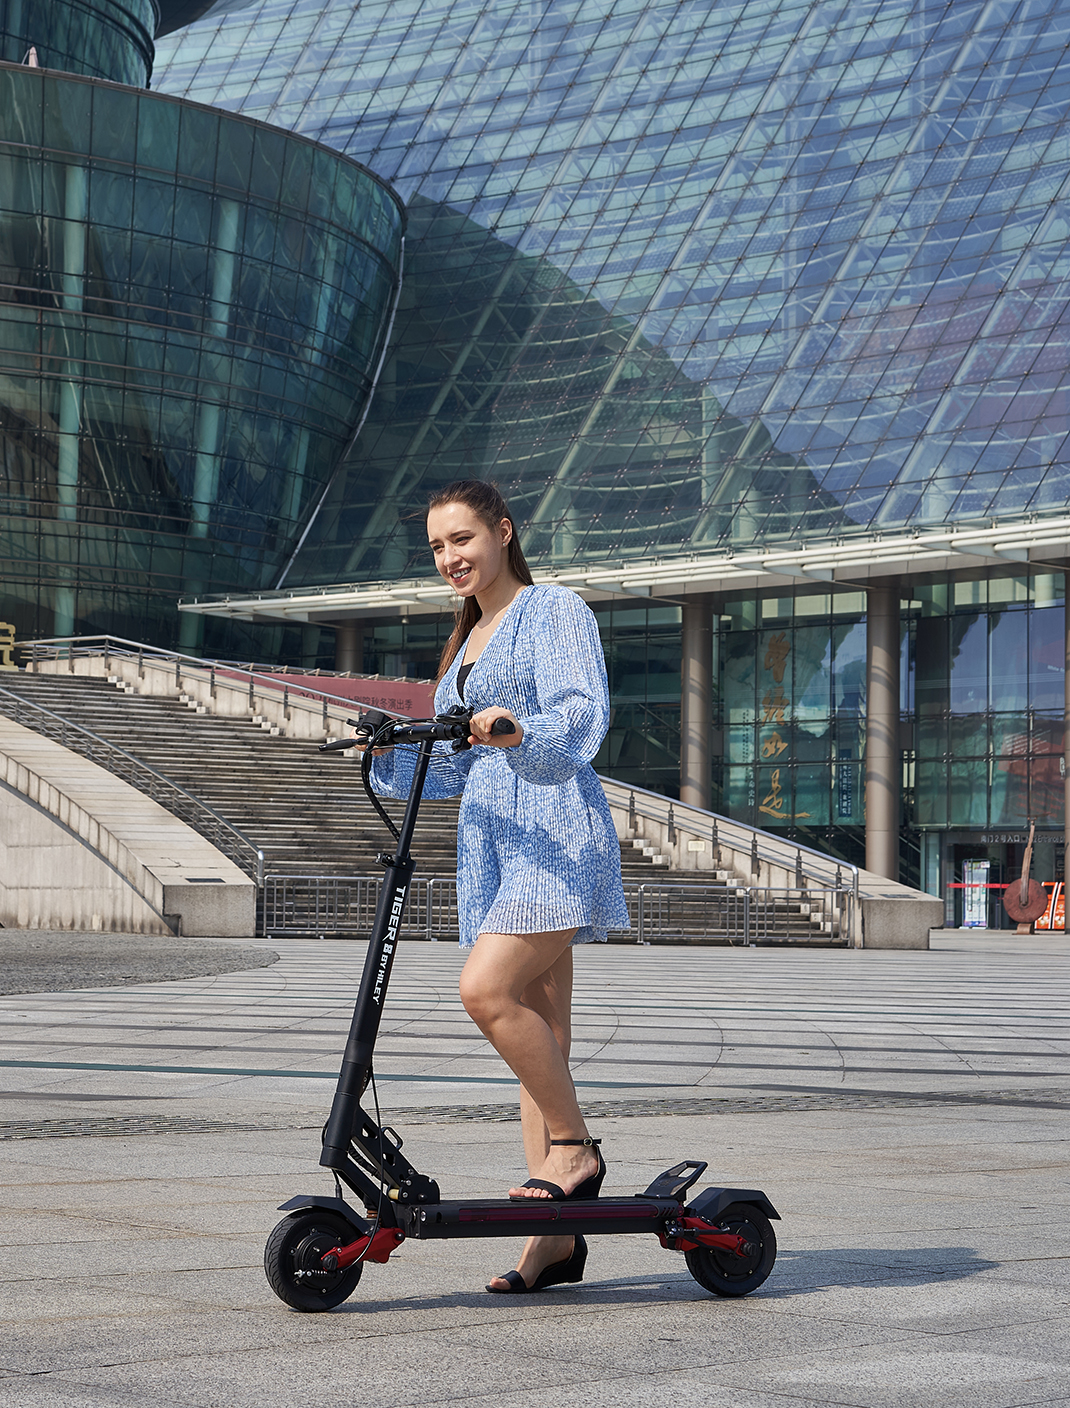 How To Use An Electric  Scooter Safely